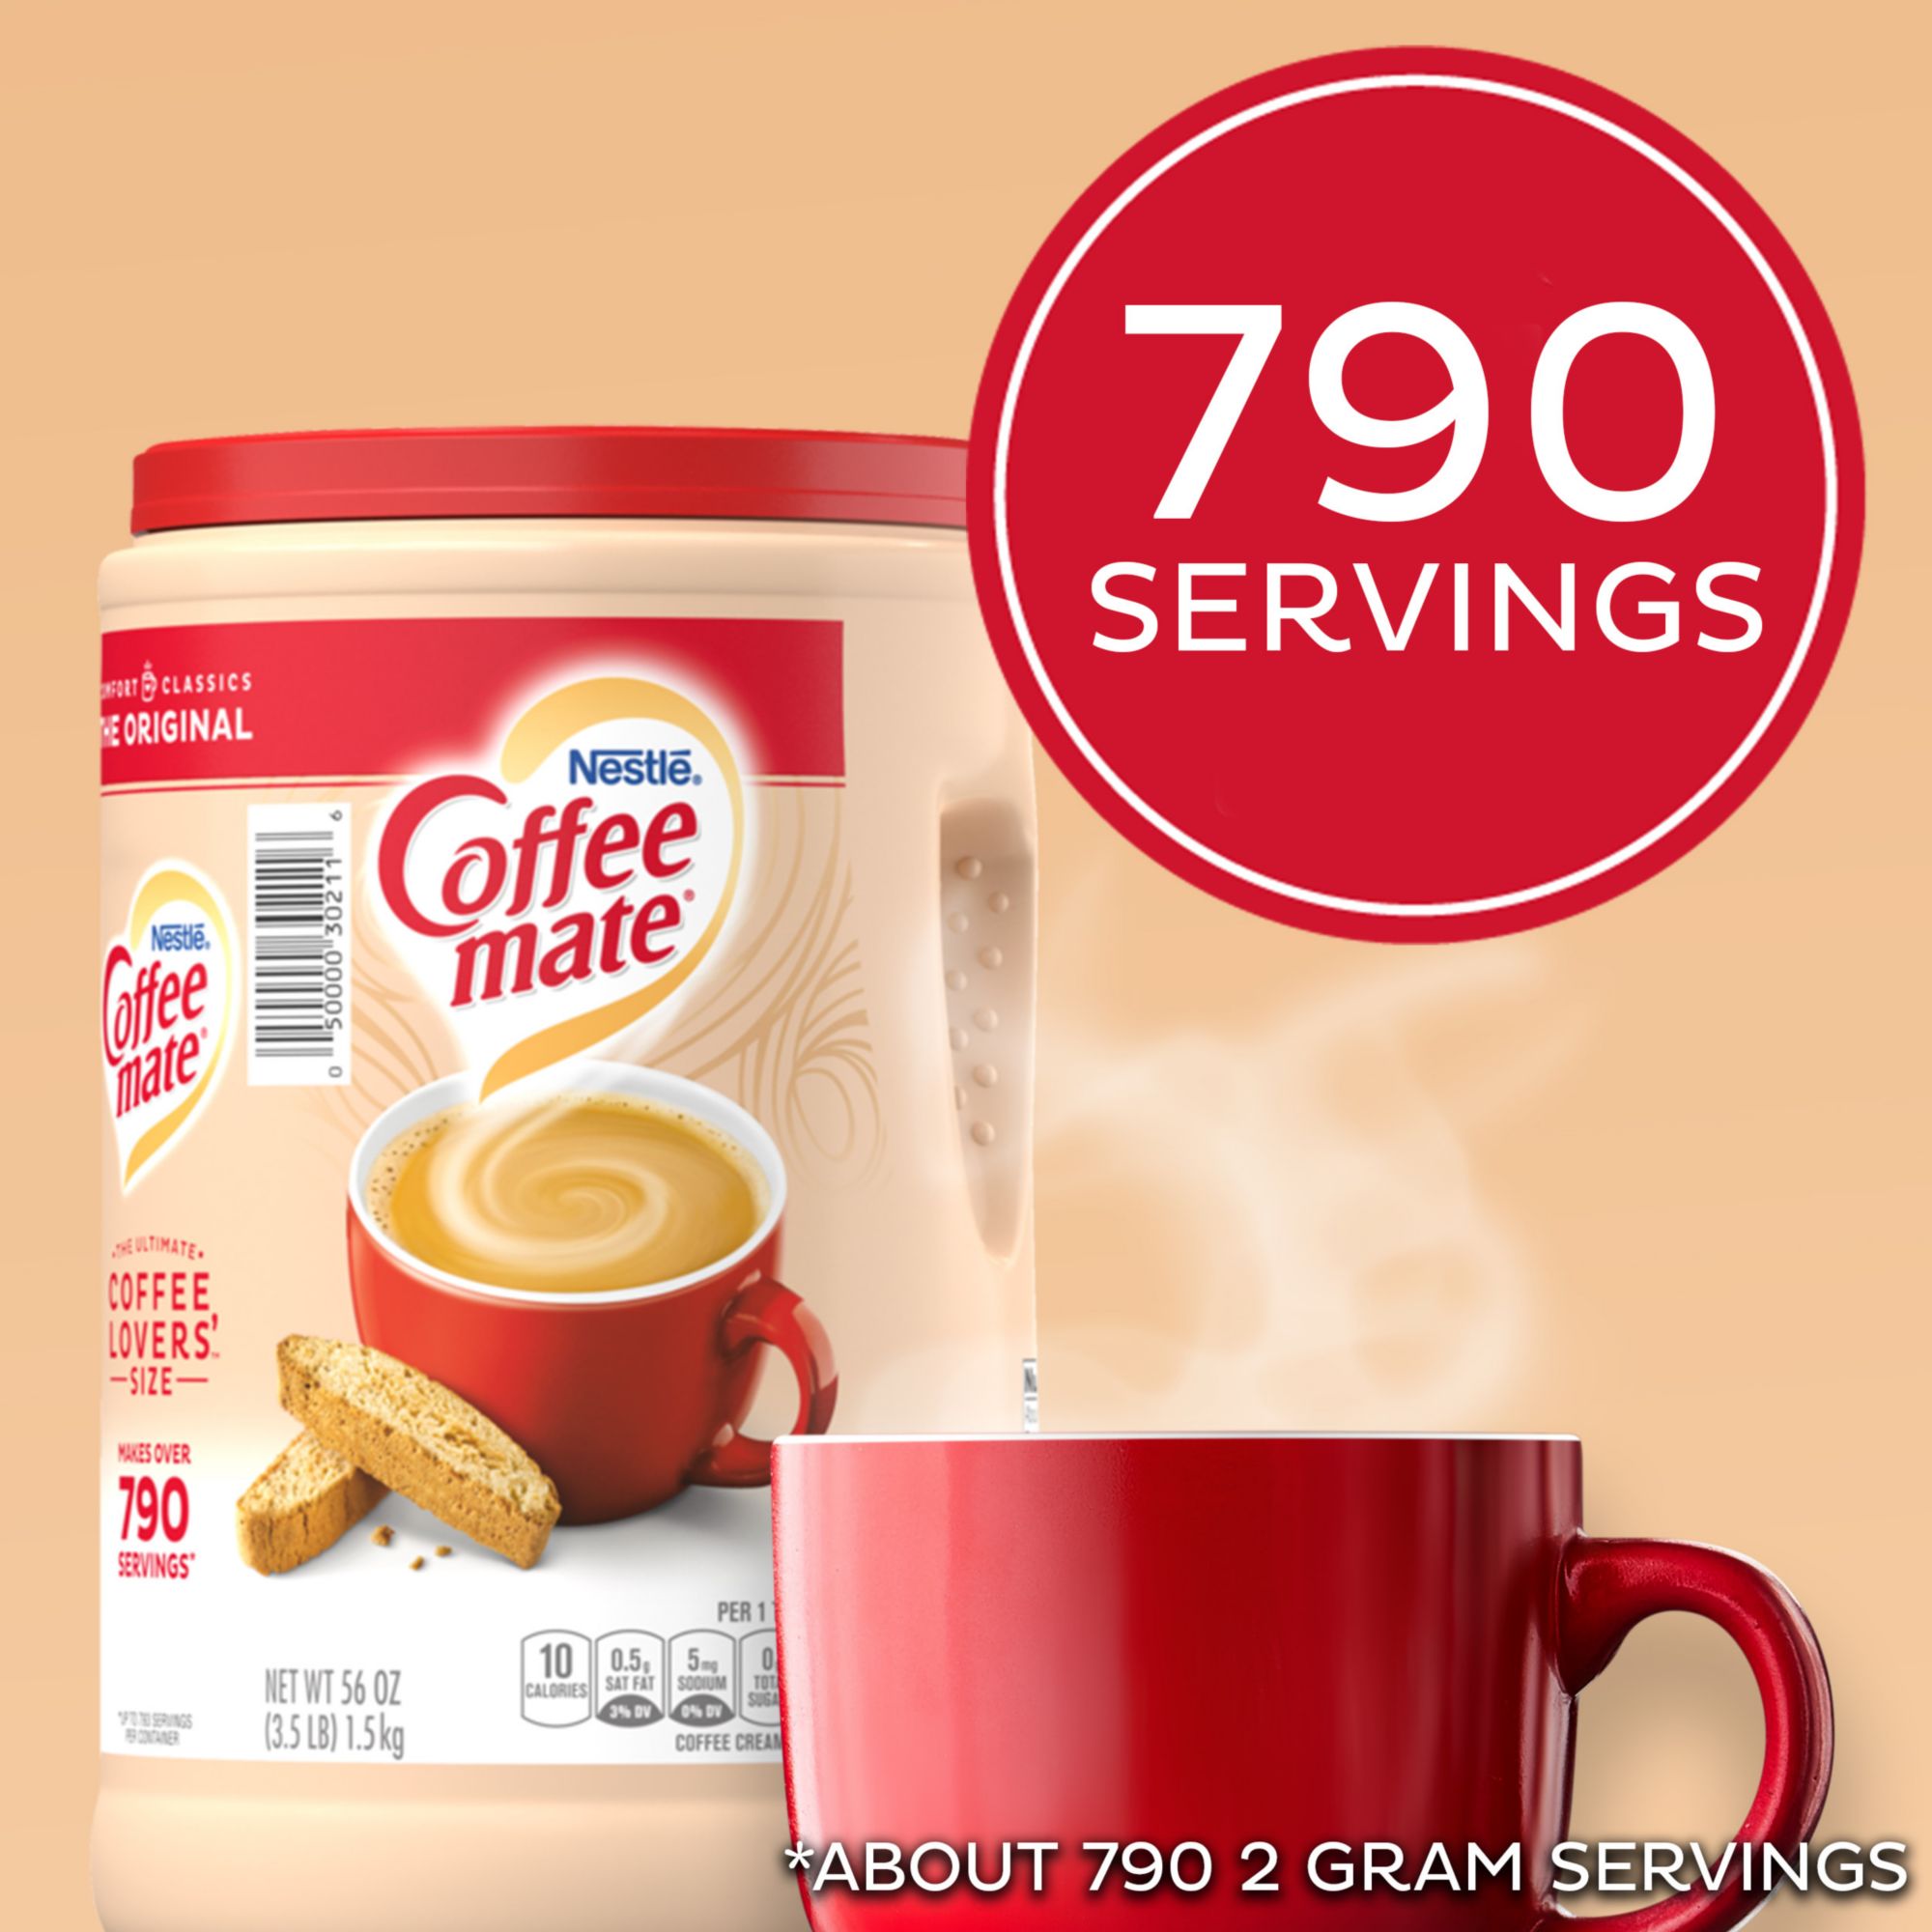 Coffee mate The Original Powder Creamer, 11 oz (Pack of 4) with By The Cup  Scoop